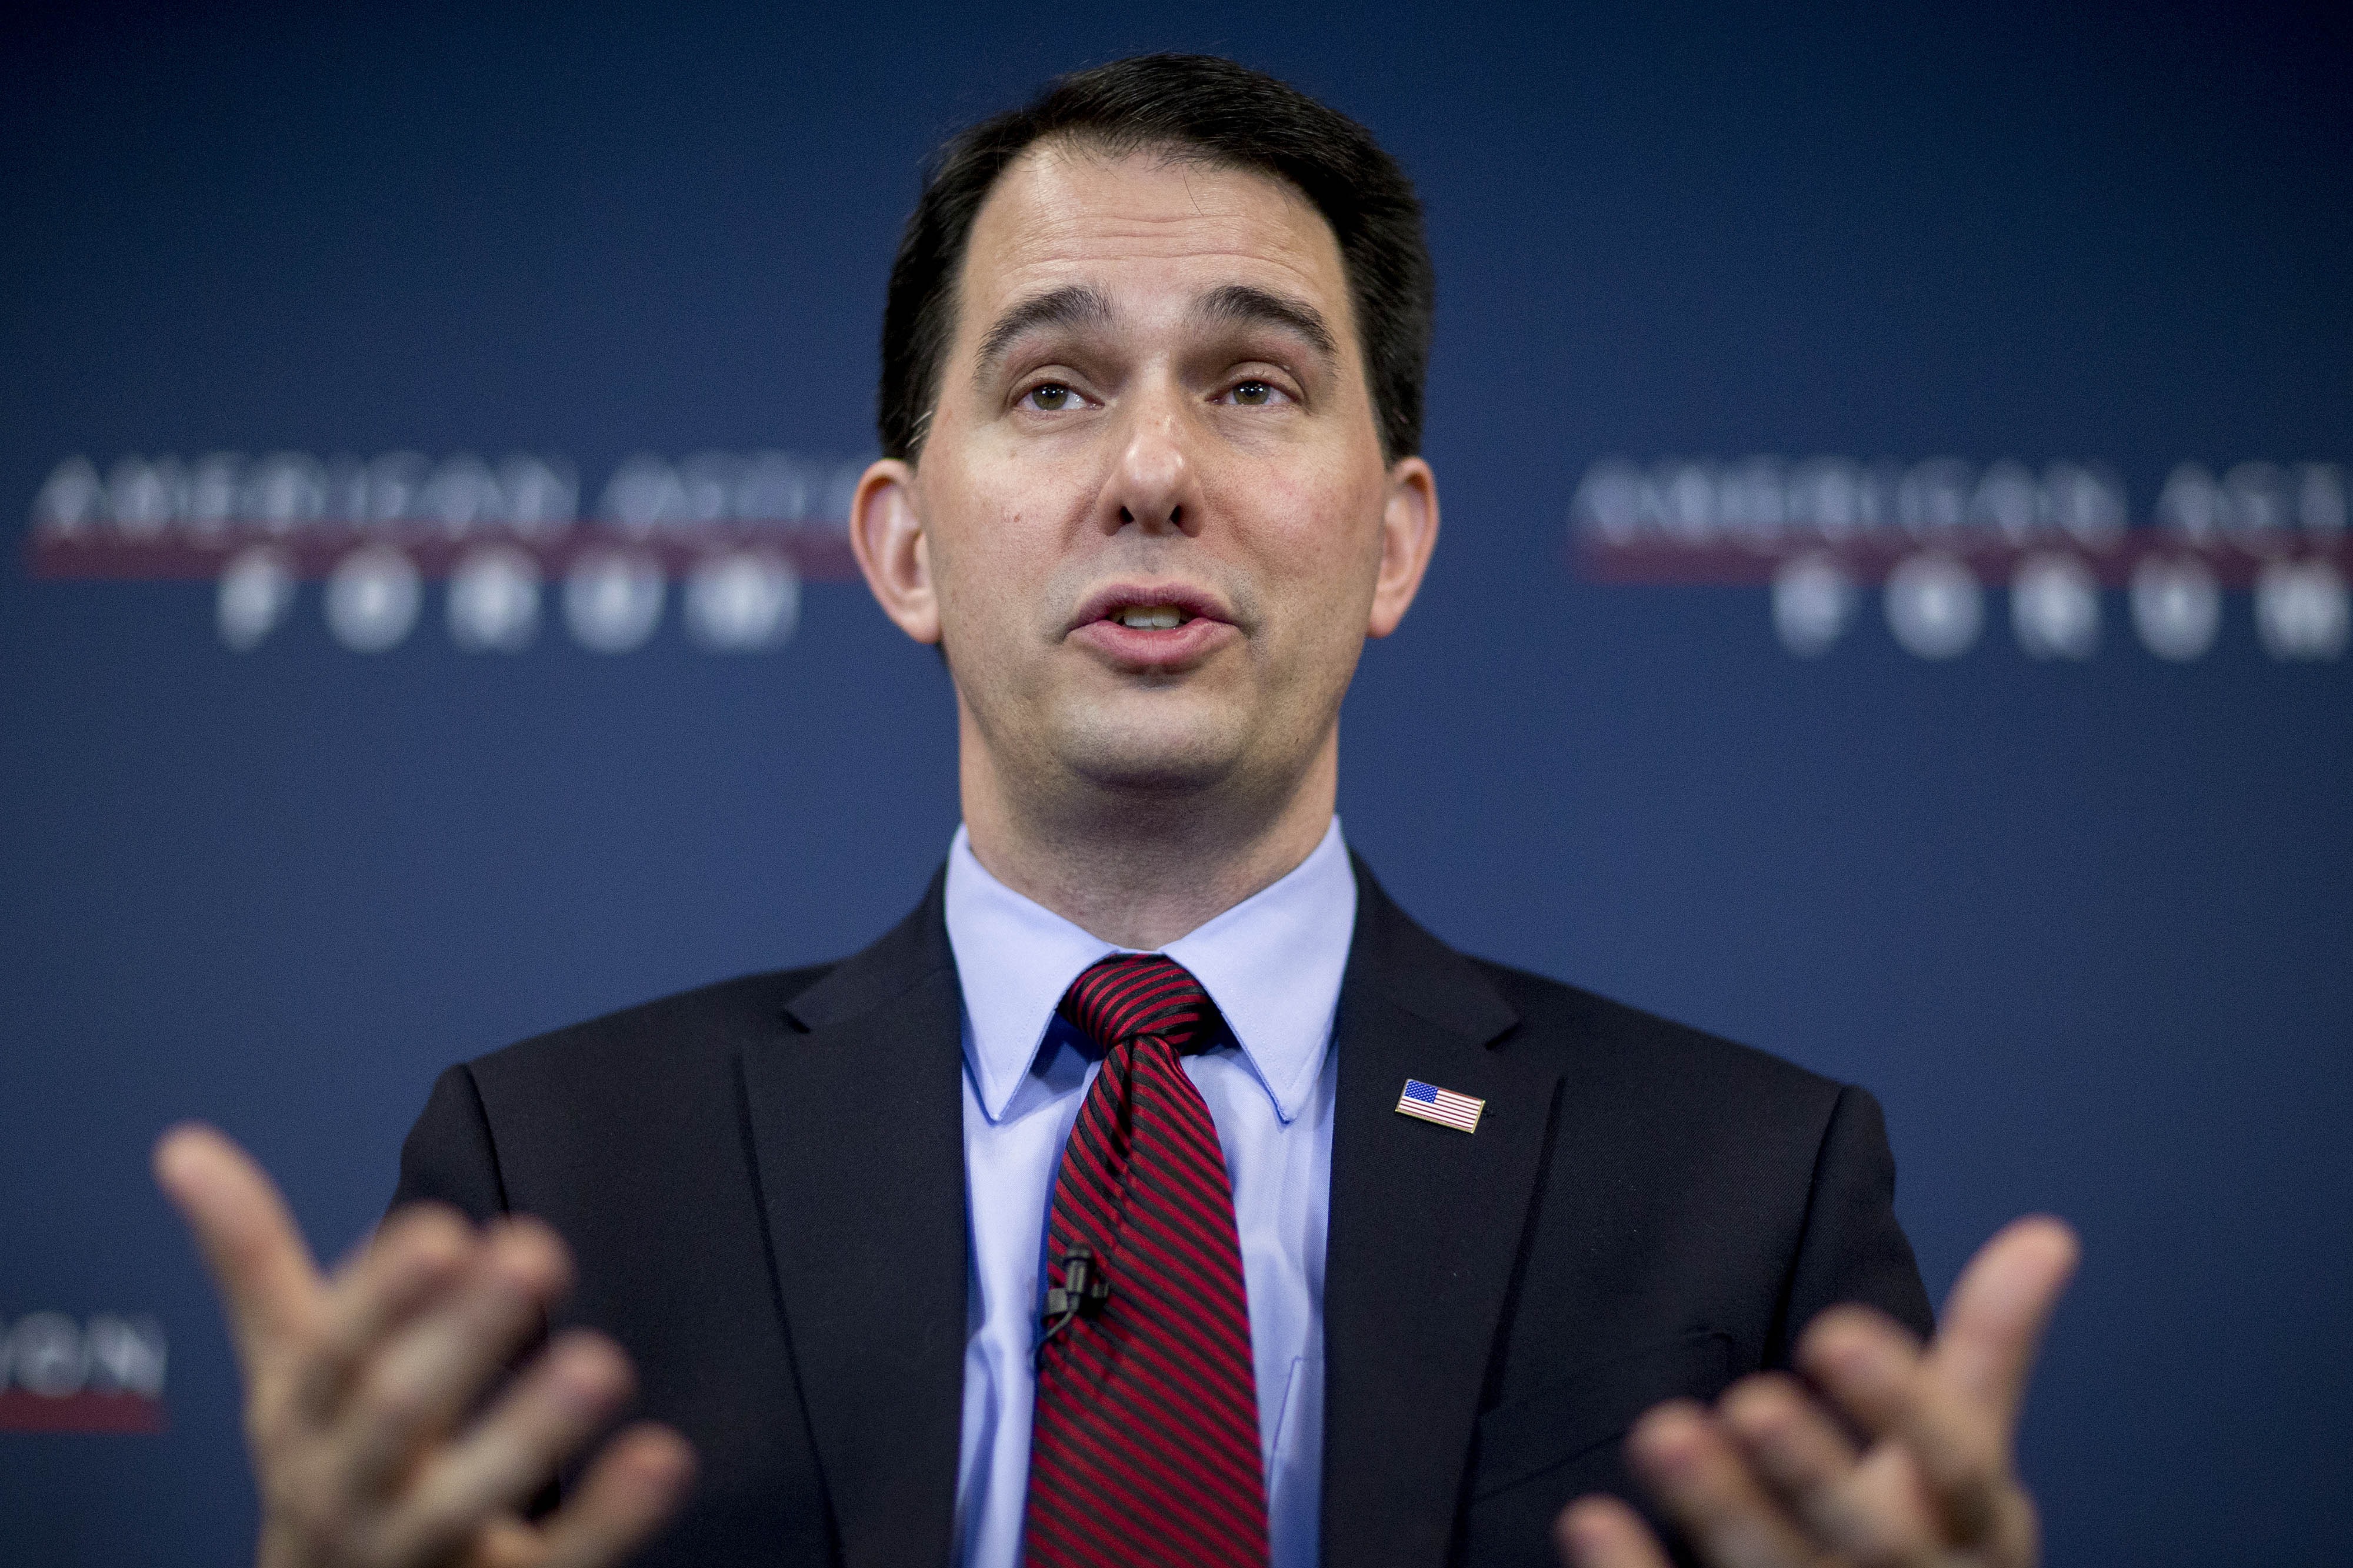 Scott Walker governor of Wisconsin speaks during a panel discussion at the American Action Forum in Washington, D.C. on Jan. 30, 2015. (Bloomberg/Getty Images)